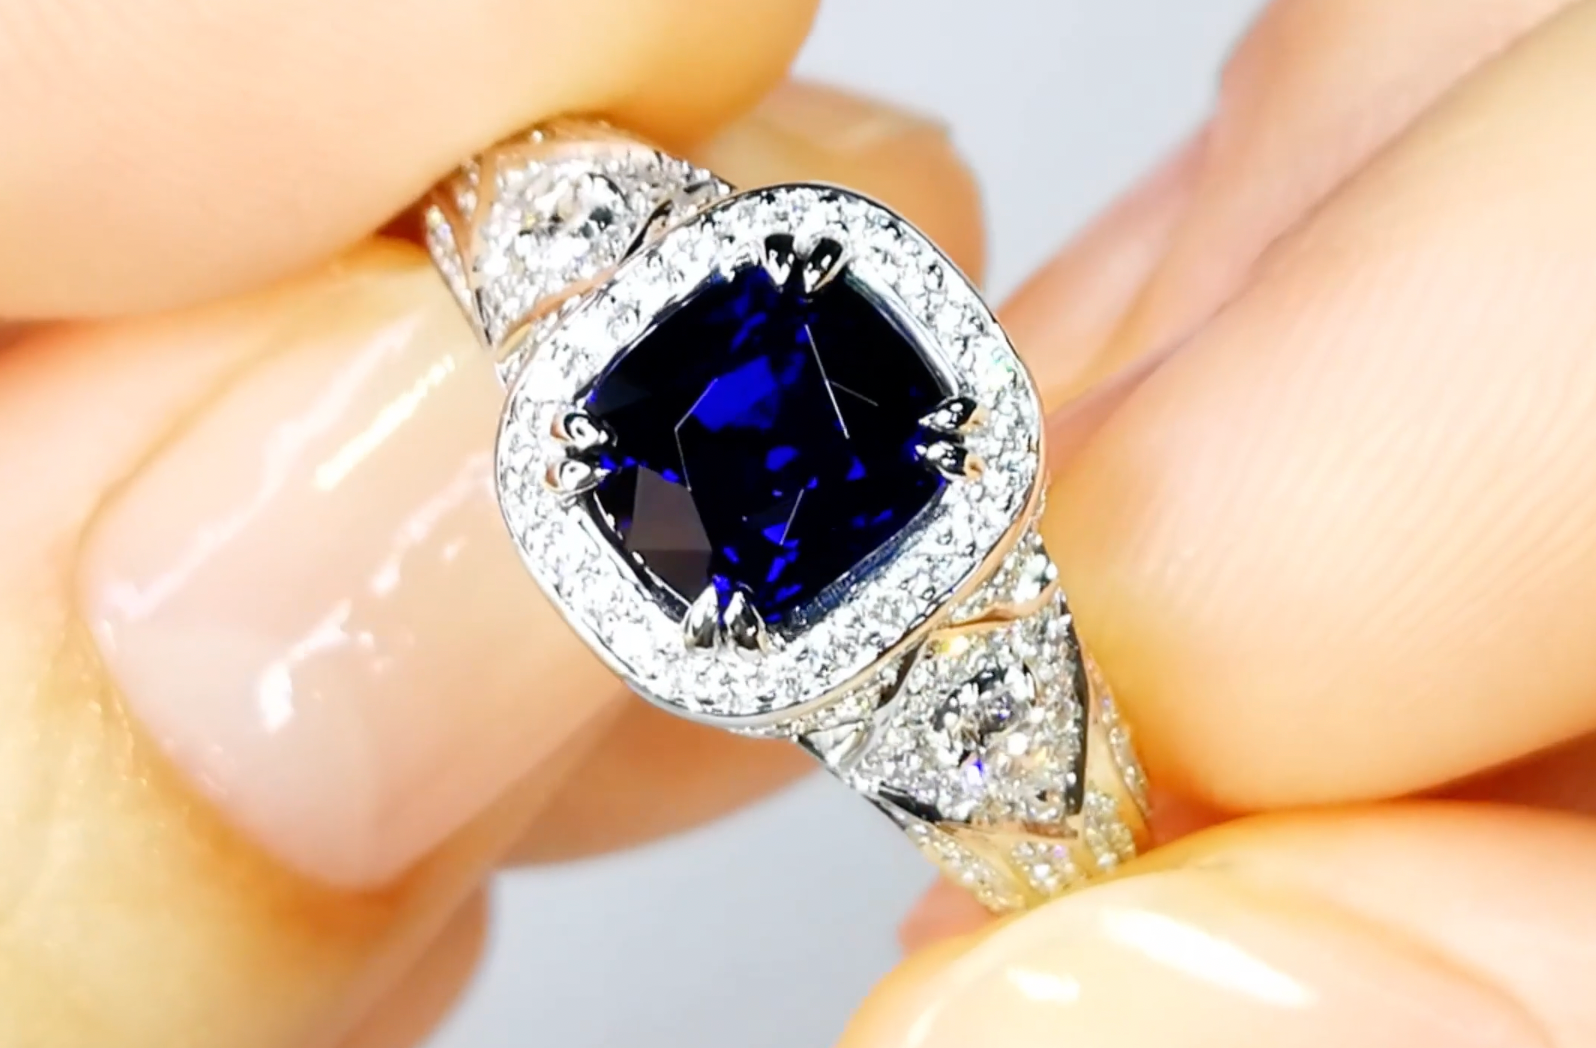 2.03ct Unheated Ceylon Royal Blue Sapphire Ring with D Flawless Diamonds set in 18K White Gold